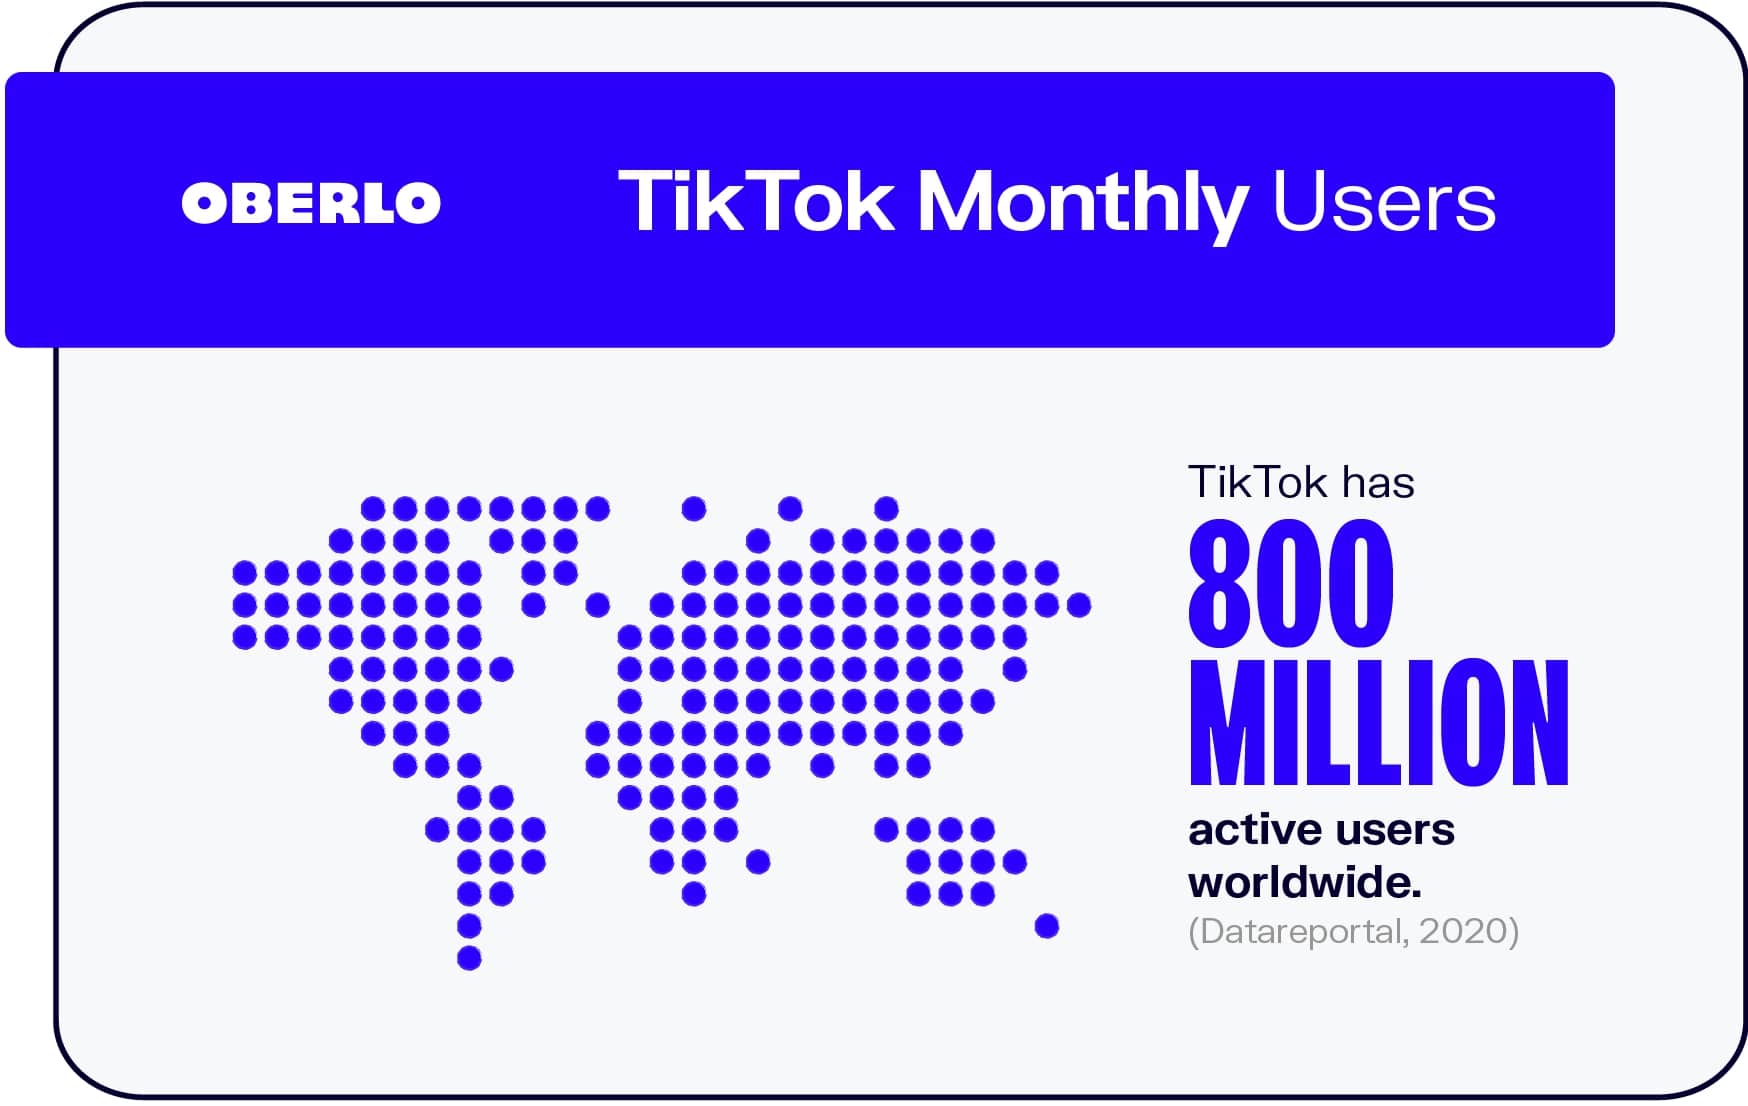 Oberlo graphic showing 800 million active monthly users on TikTok